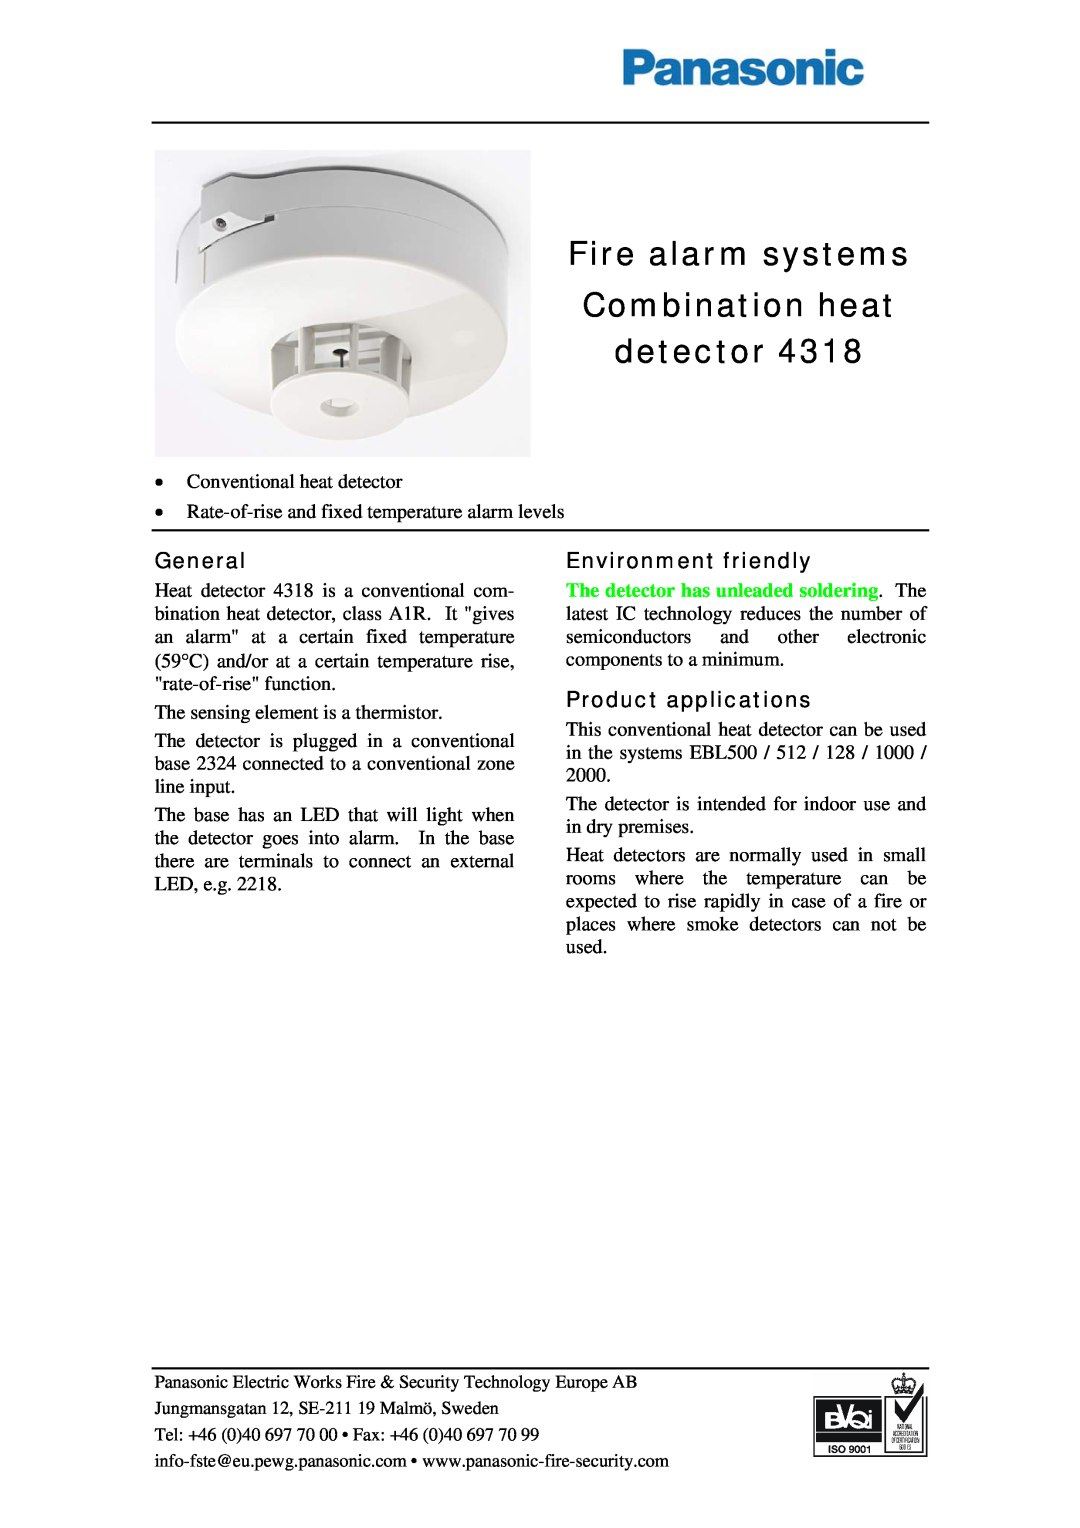 Panasonic 4318 manual Fire alarm systems Combination heat detector, General, Environment friendly, Product applications 